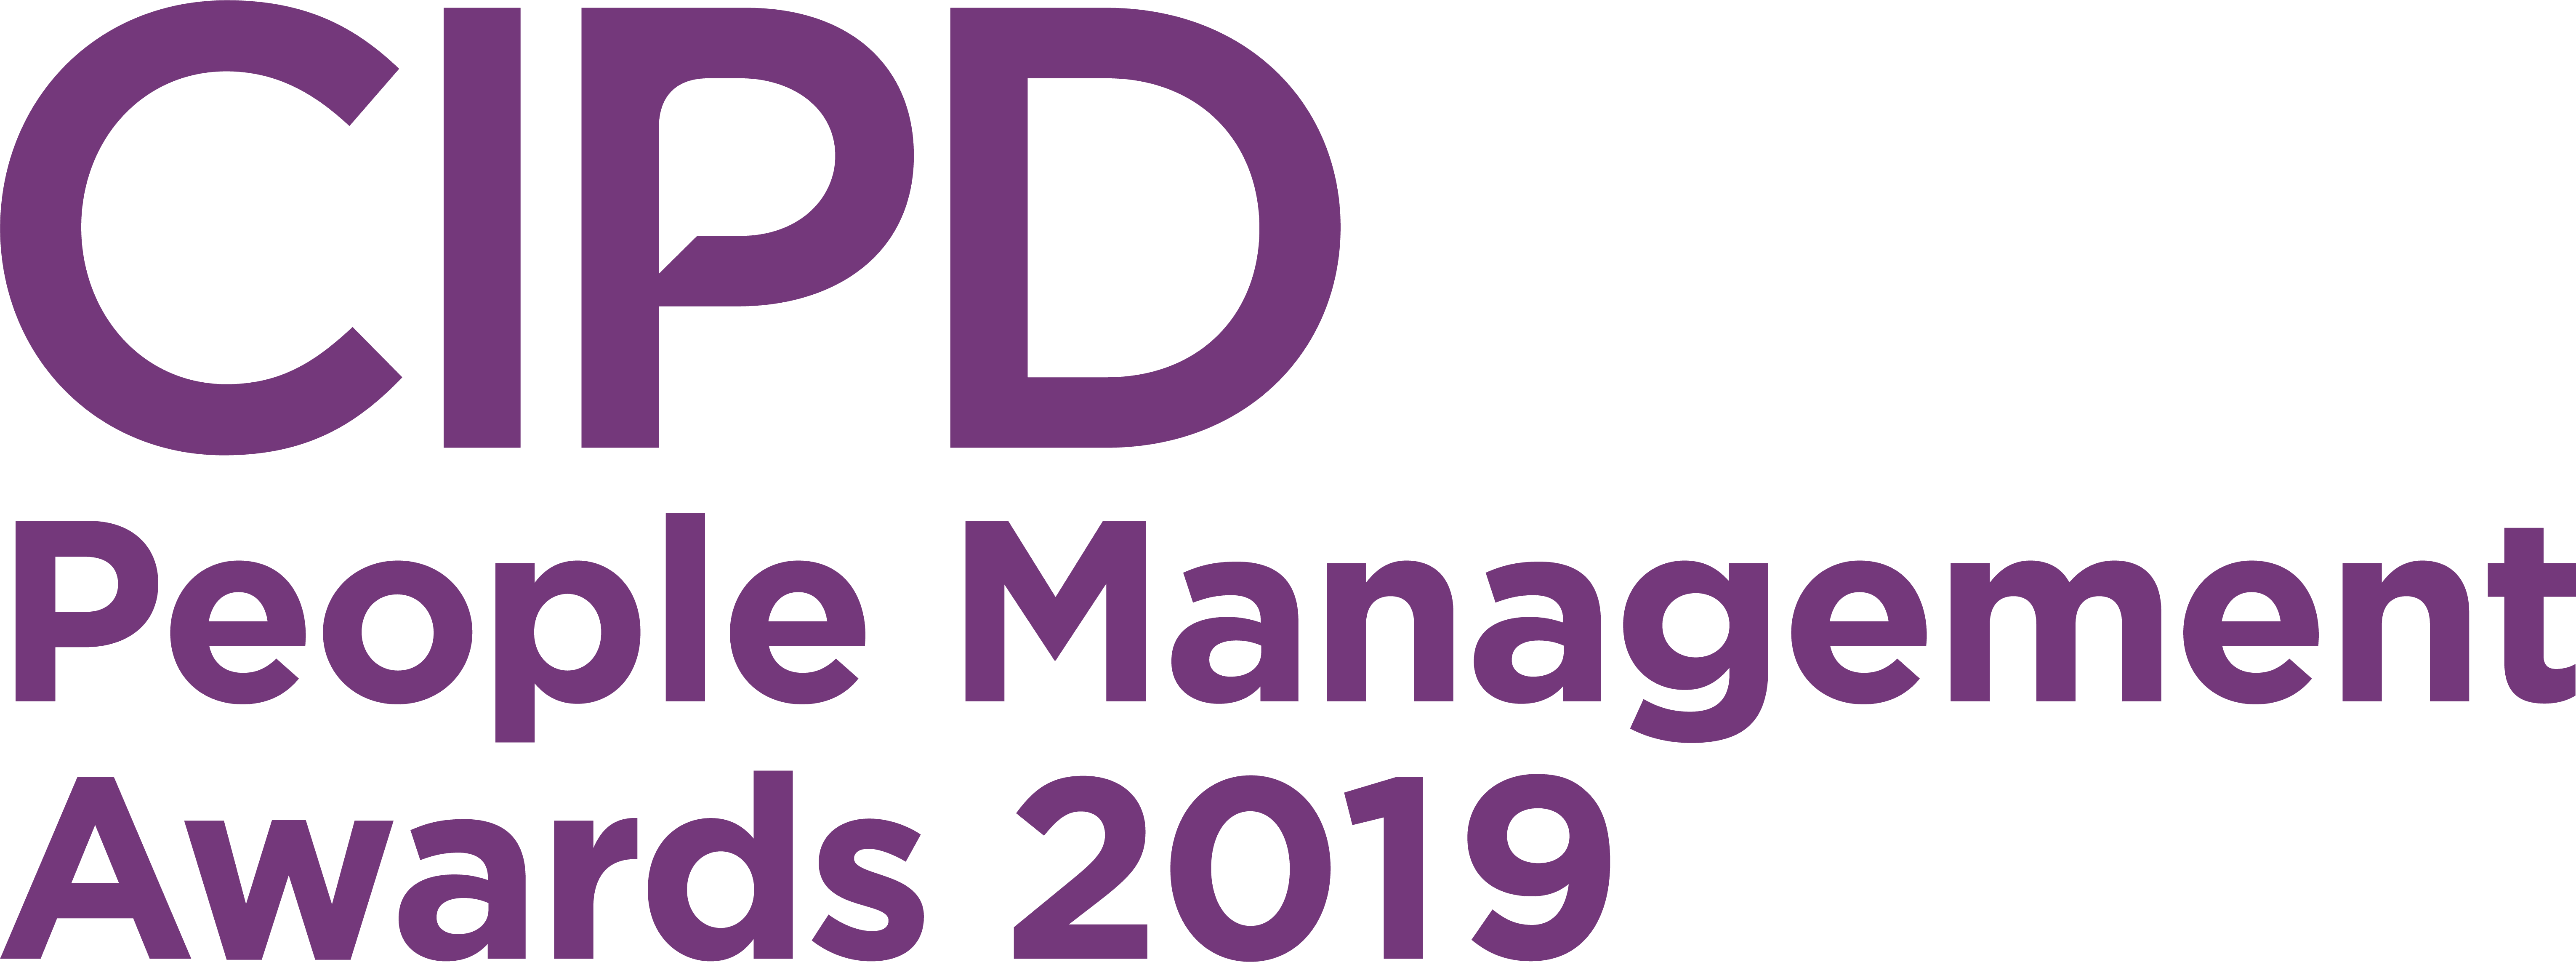 CIPD People Management Awards